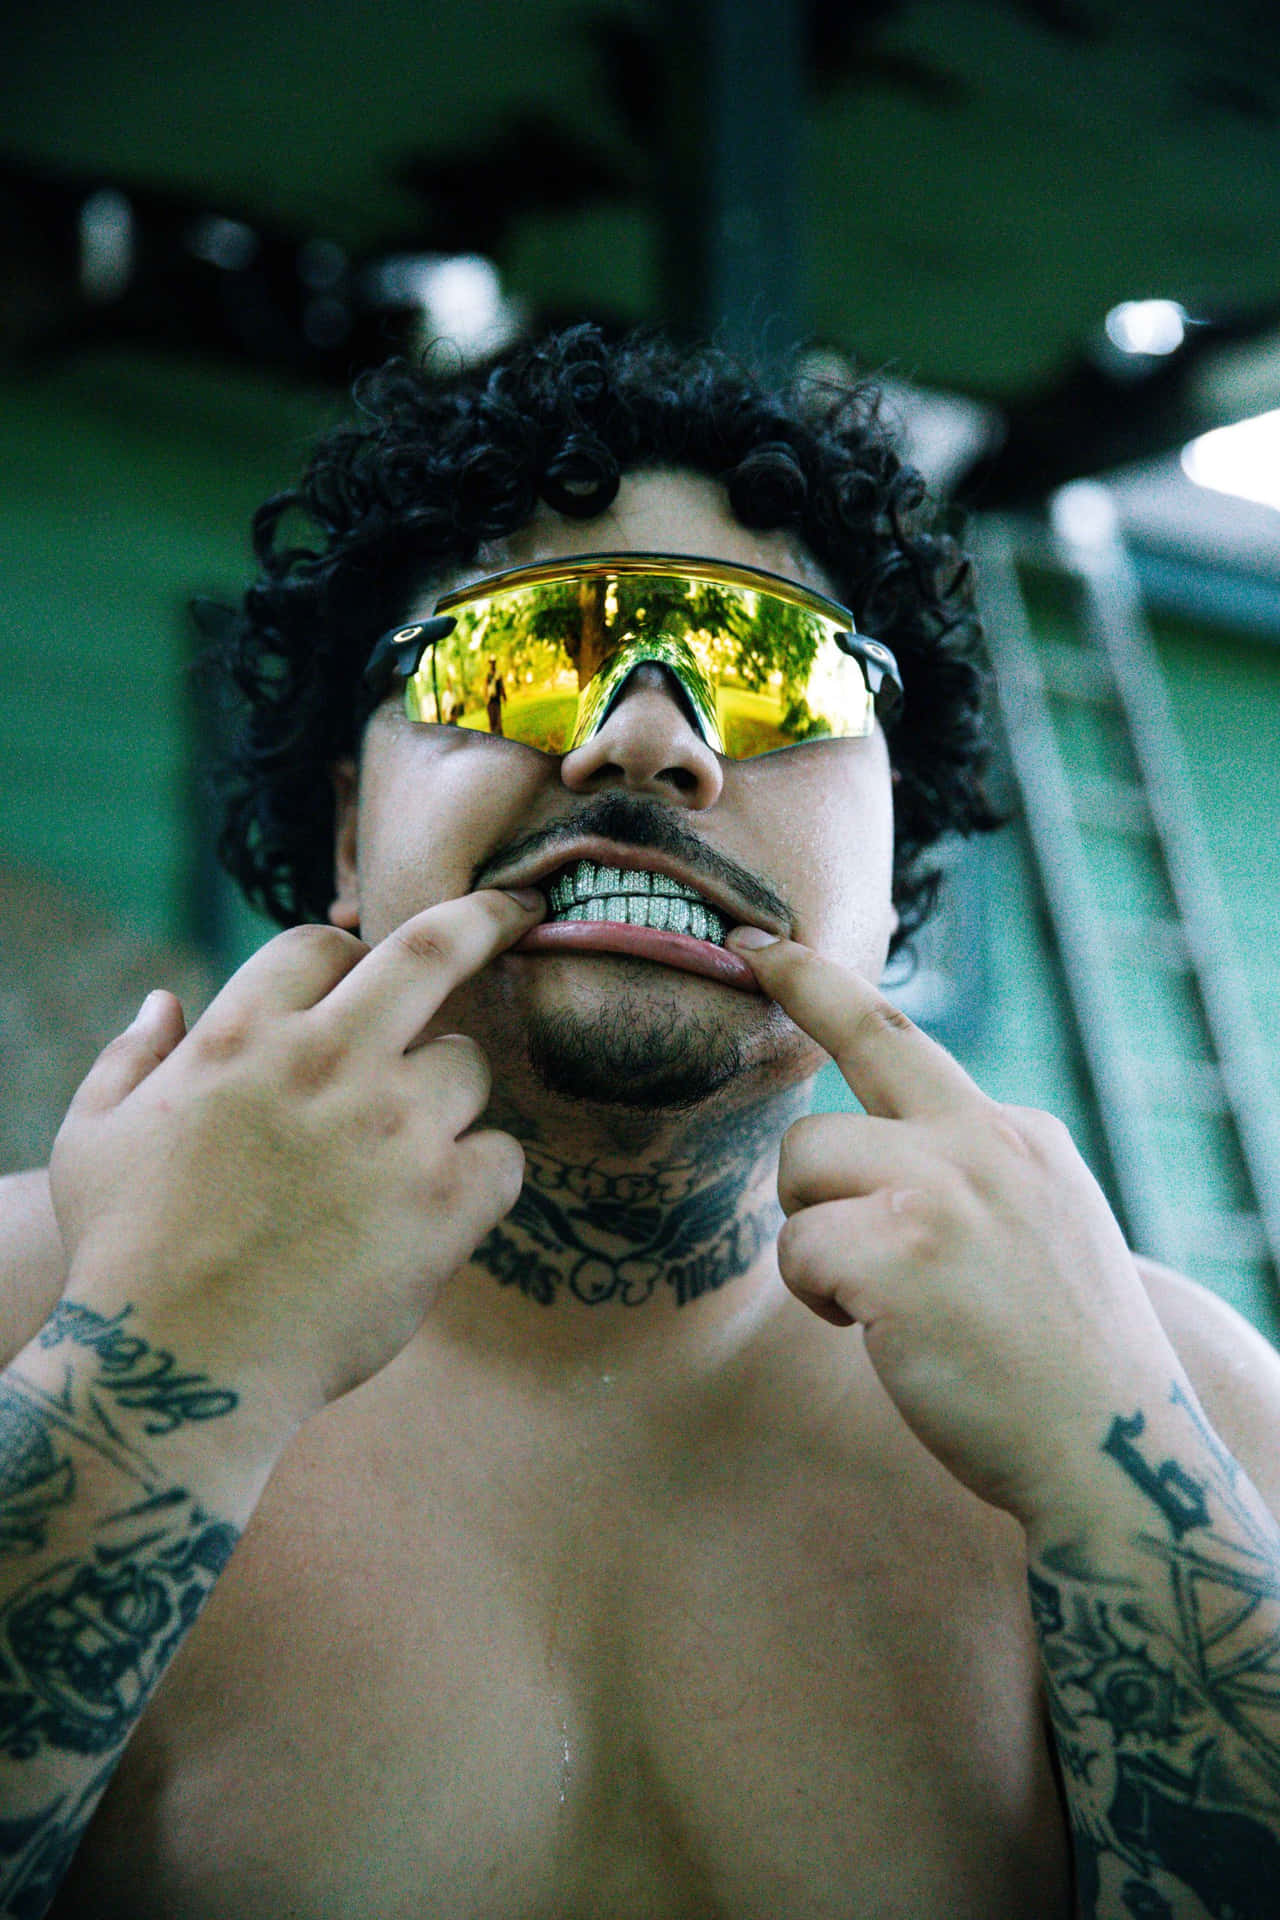 Man_with_ Golden_ Shades_and_ Tattoos.jpg Wallpaper